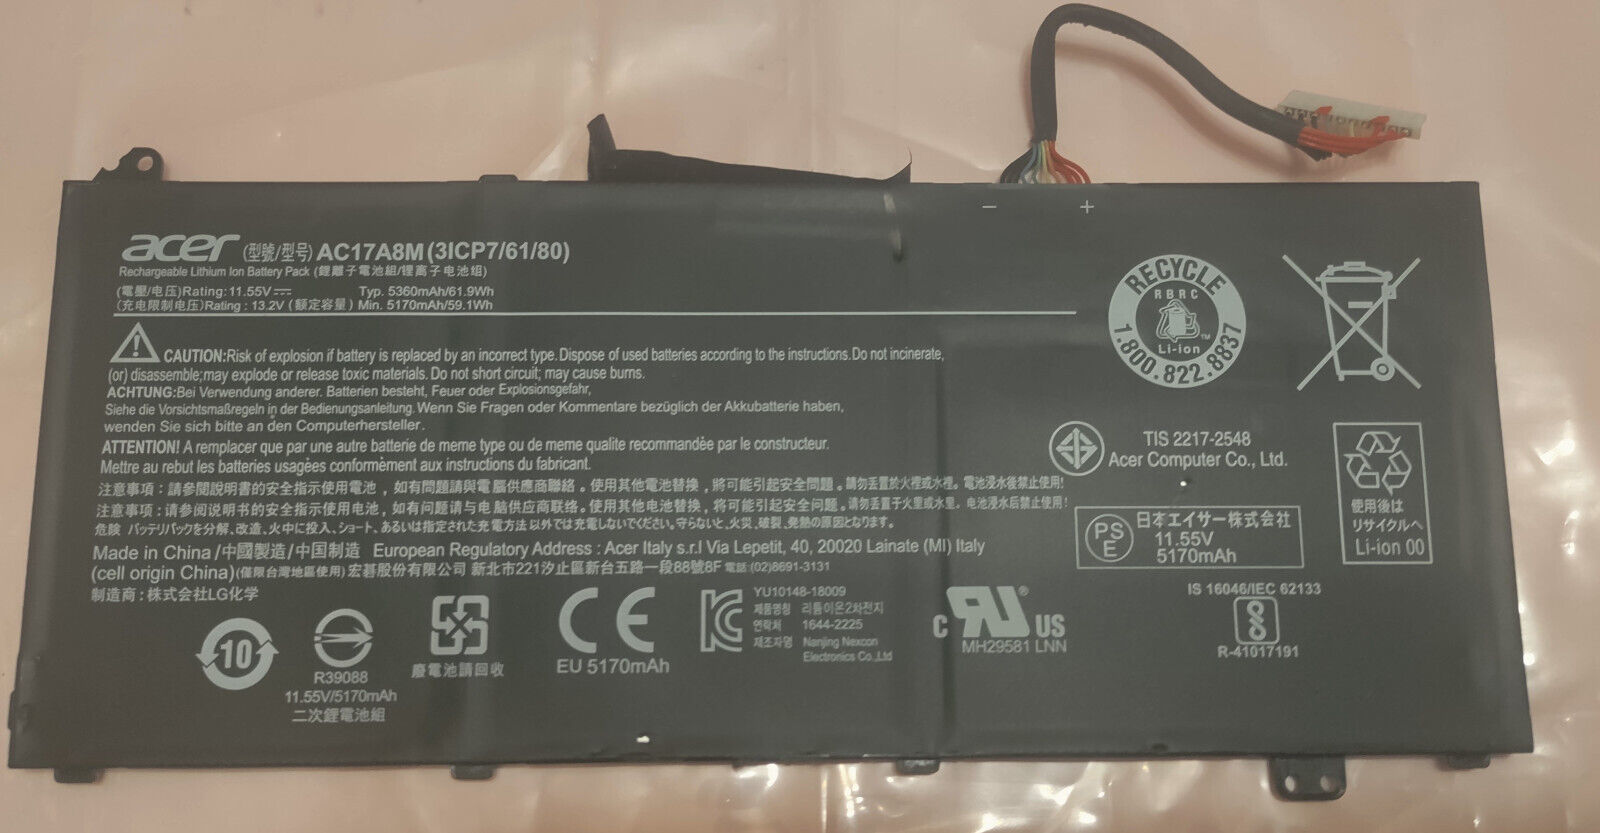 Genuine 51.70AH Battery P/N AC17A8M for Acer Spin 3 SP314-52 SP314-51 N17W5 SN82 - $29.99